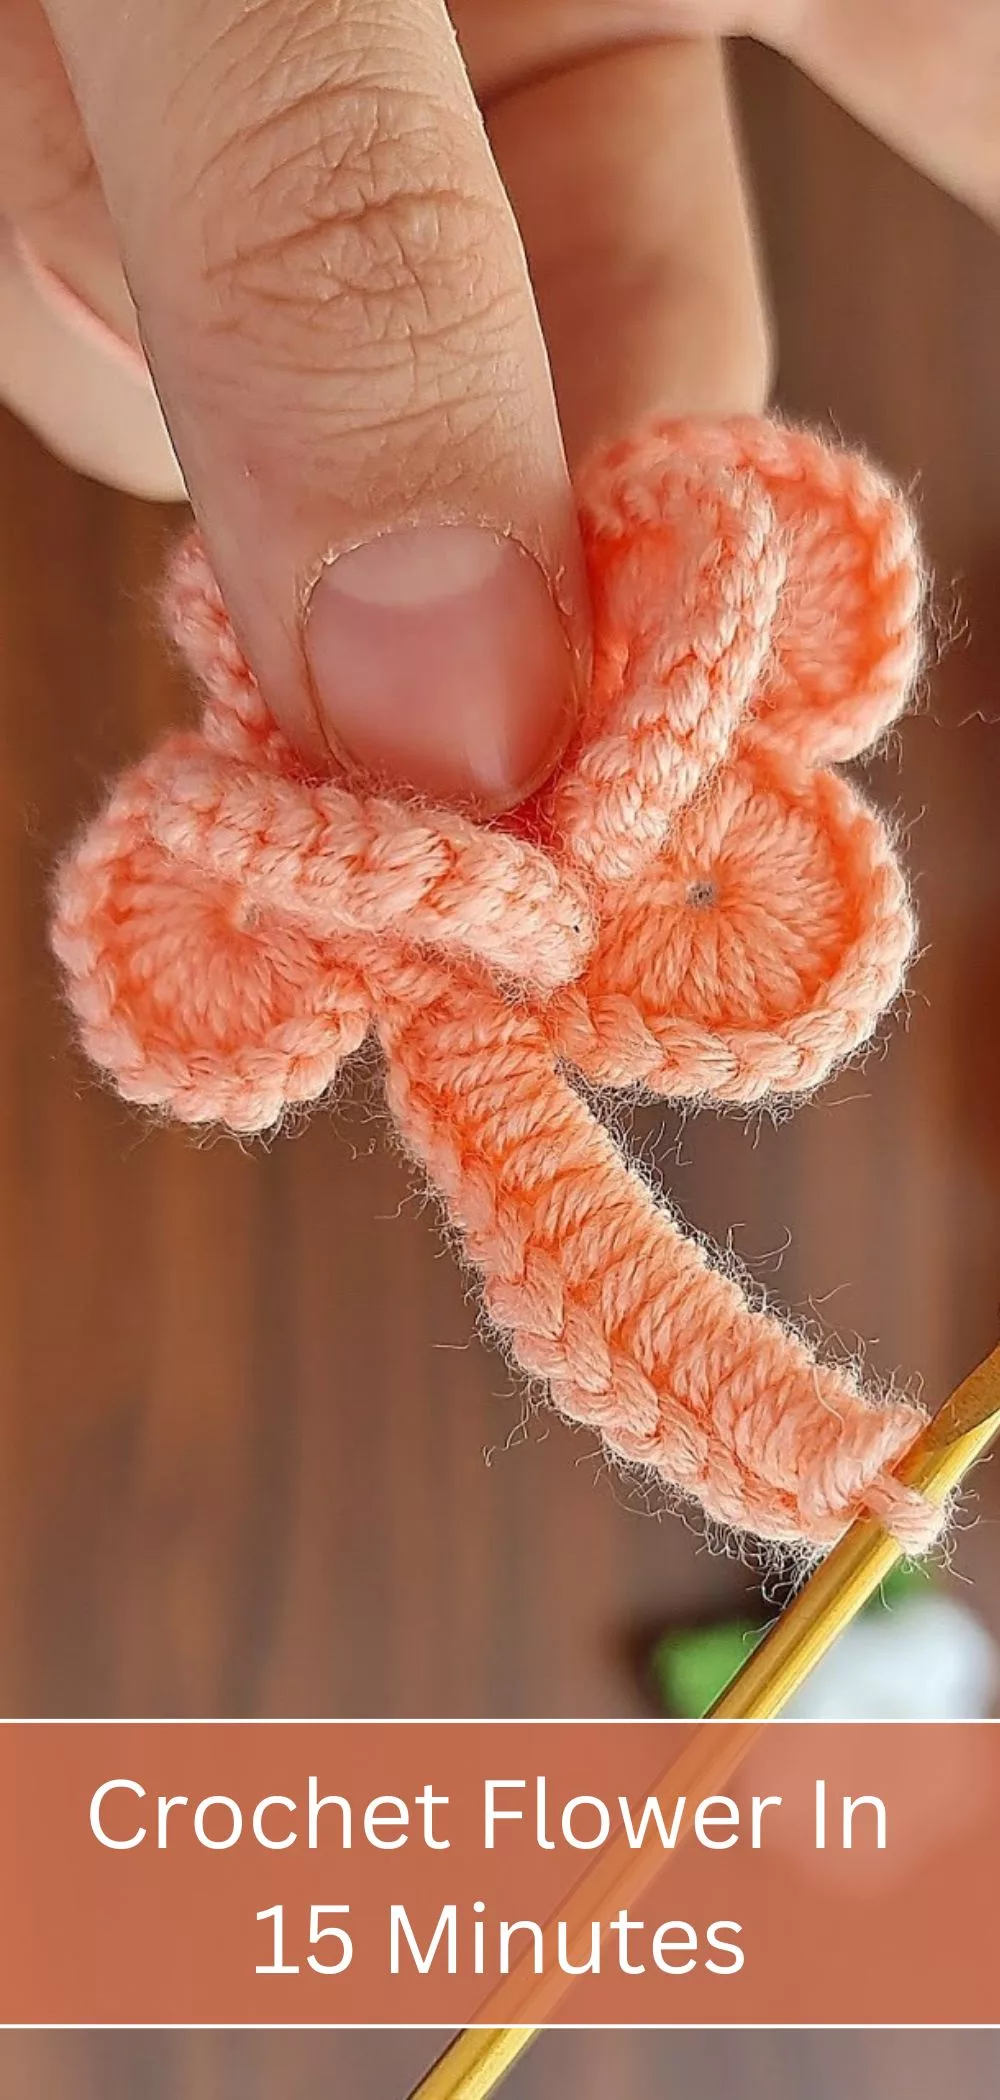 Such A Wonderful Crochet Flower Can Be Done In Only 15 Minutes!  You will use simple crochet techniques in this project.